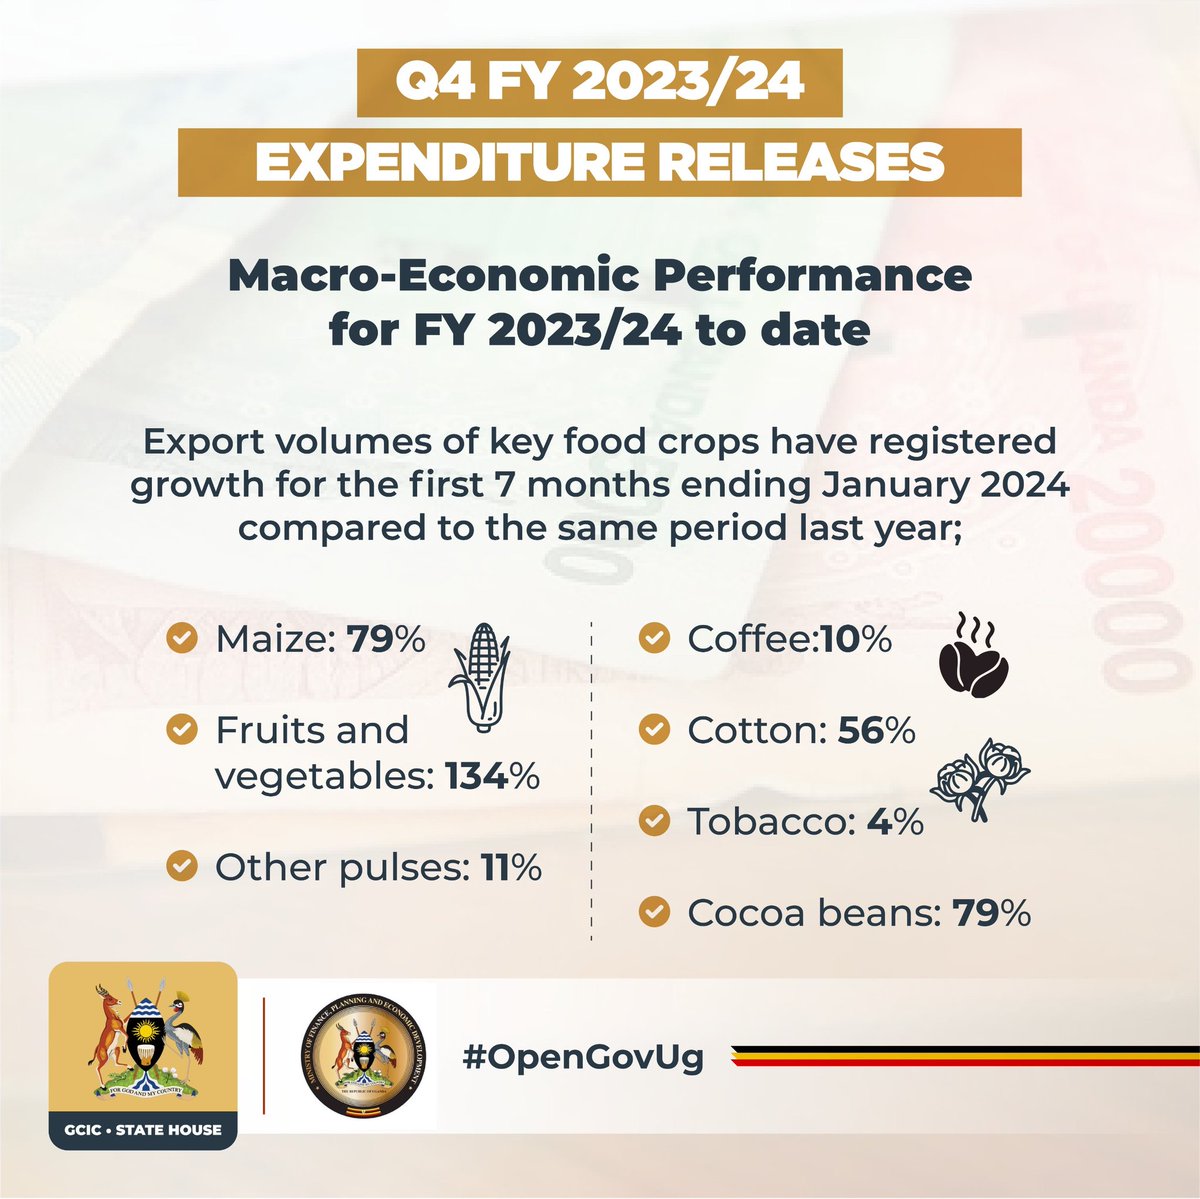 The agriculture sector is expected to grow by 6.0% this financial year from 4.8% the previous financial year mainly driven by increased production of food crops, cash crops, livestock and fish. #KnowYourBudget24 #OpenGovUg